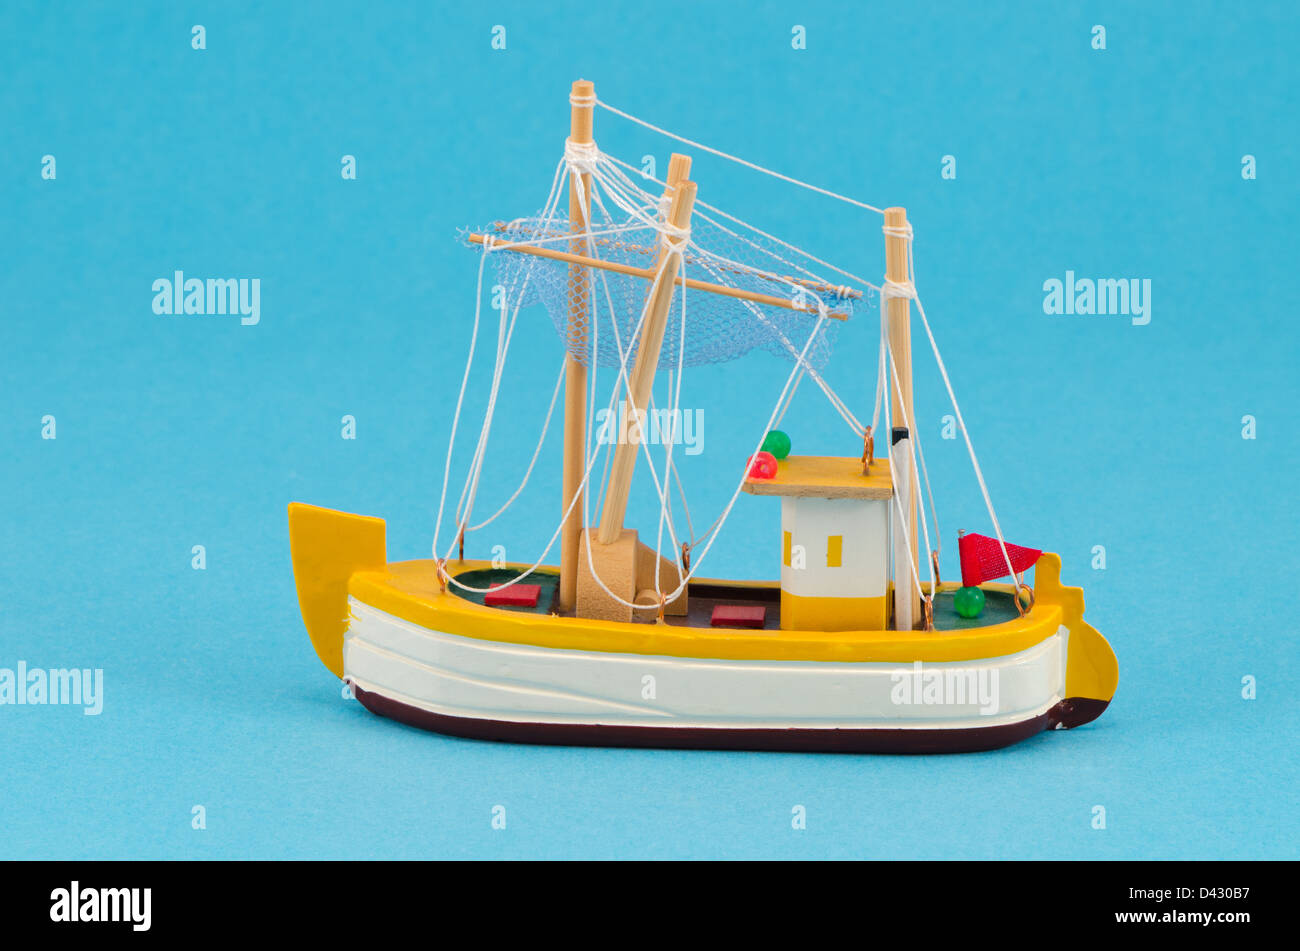 wooden handmade object boat ship with sail model decoration on blue background. Stock Photo